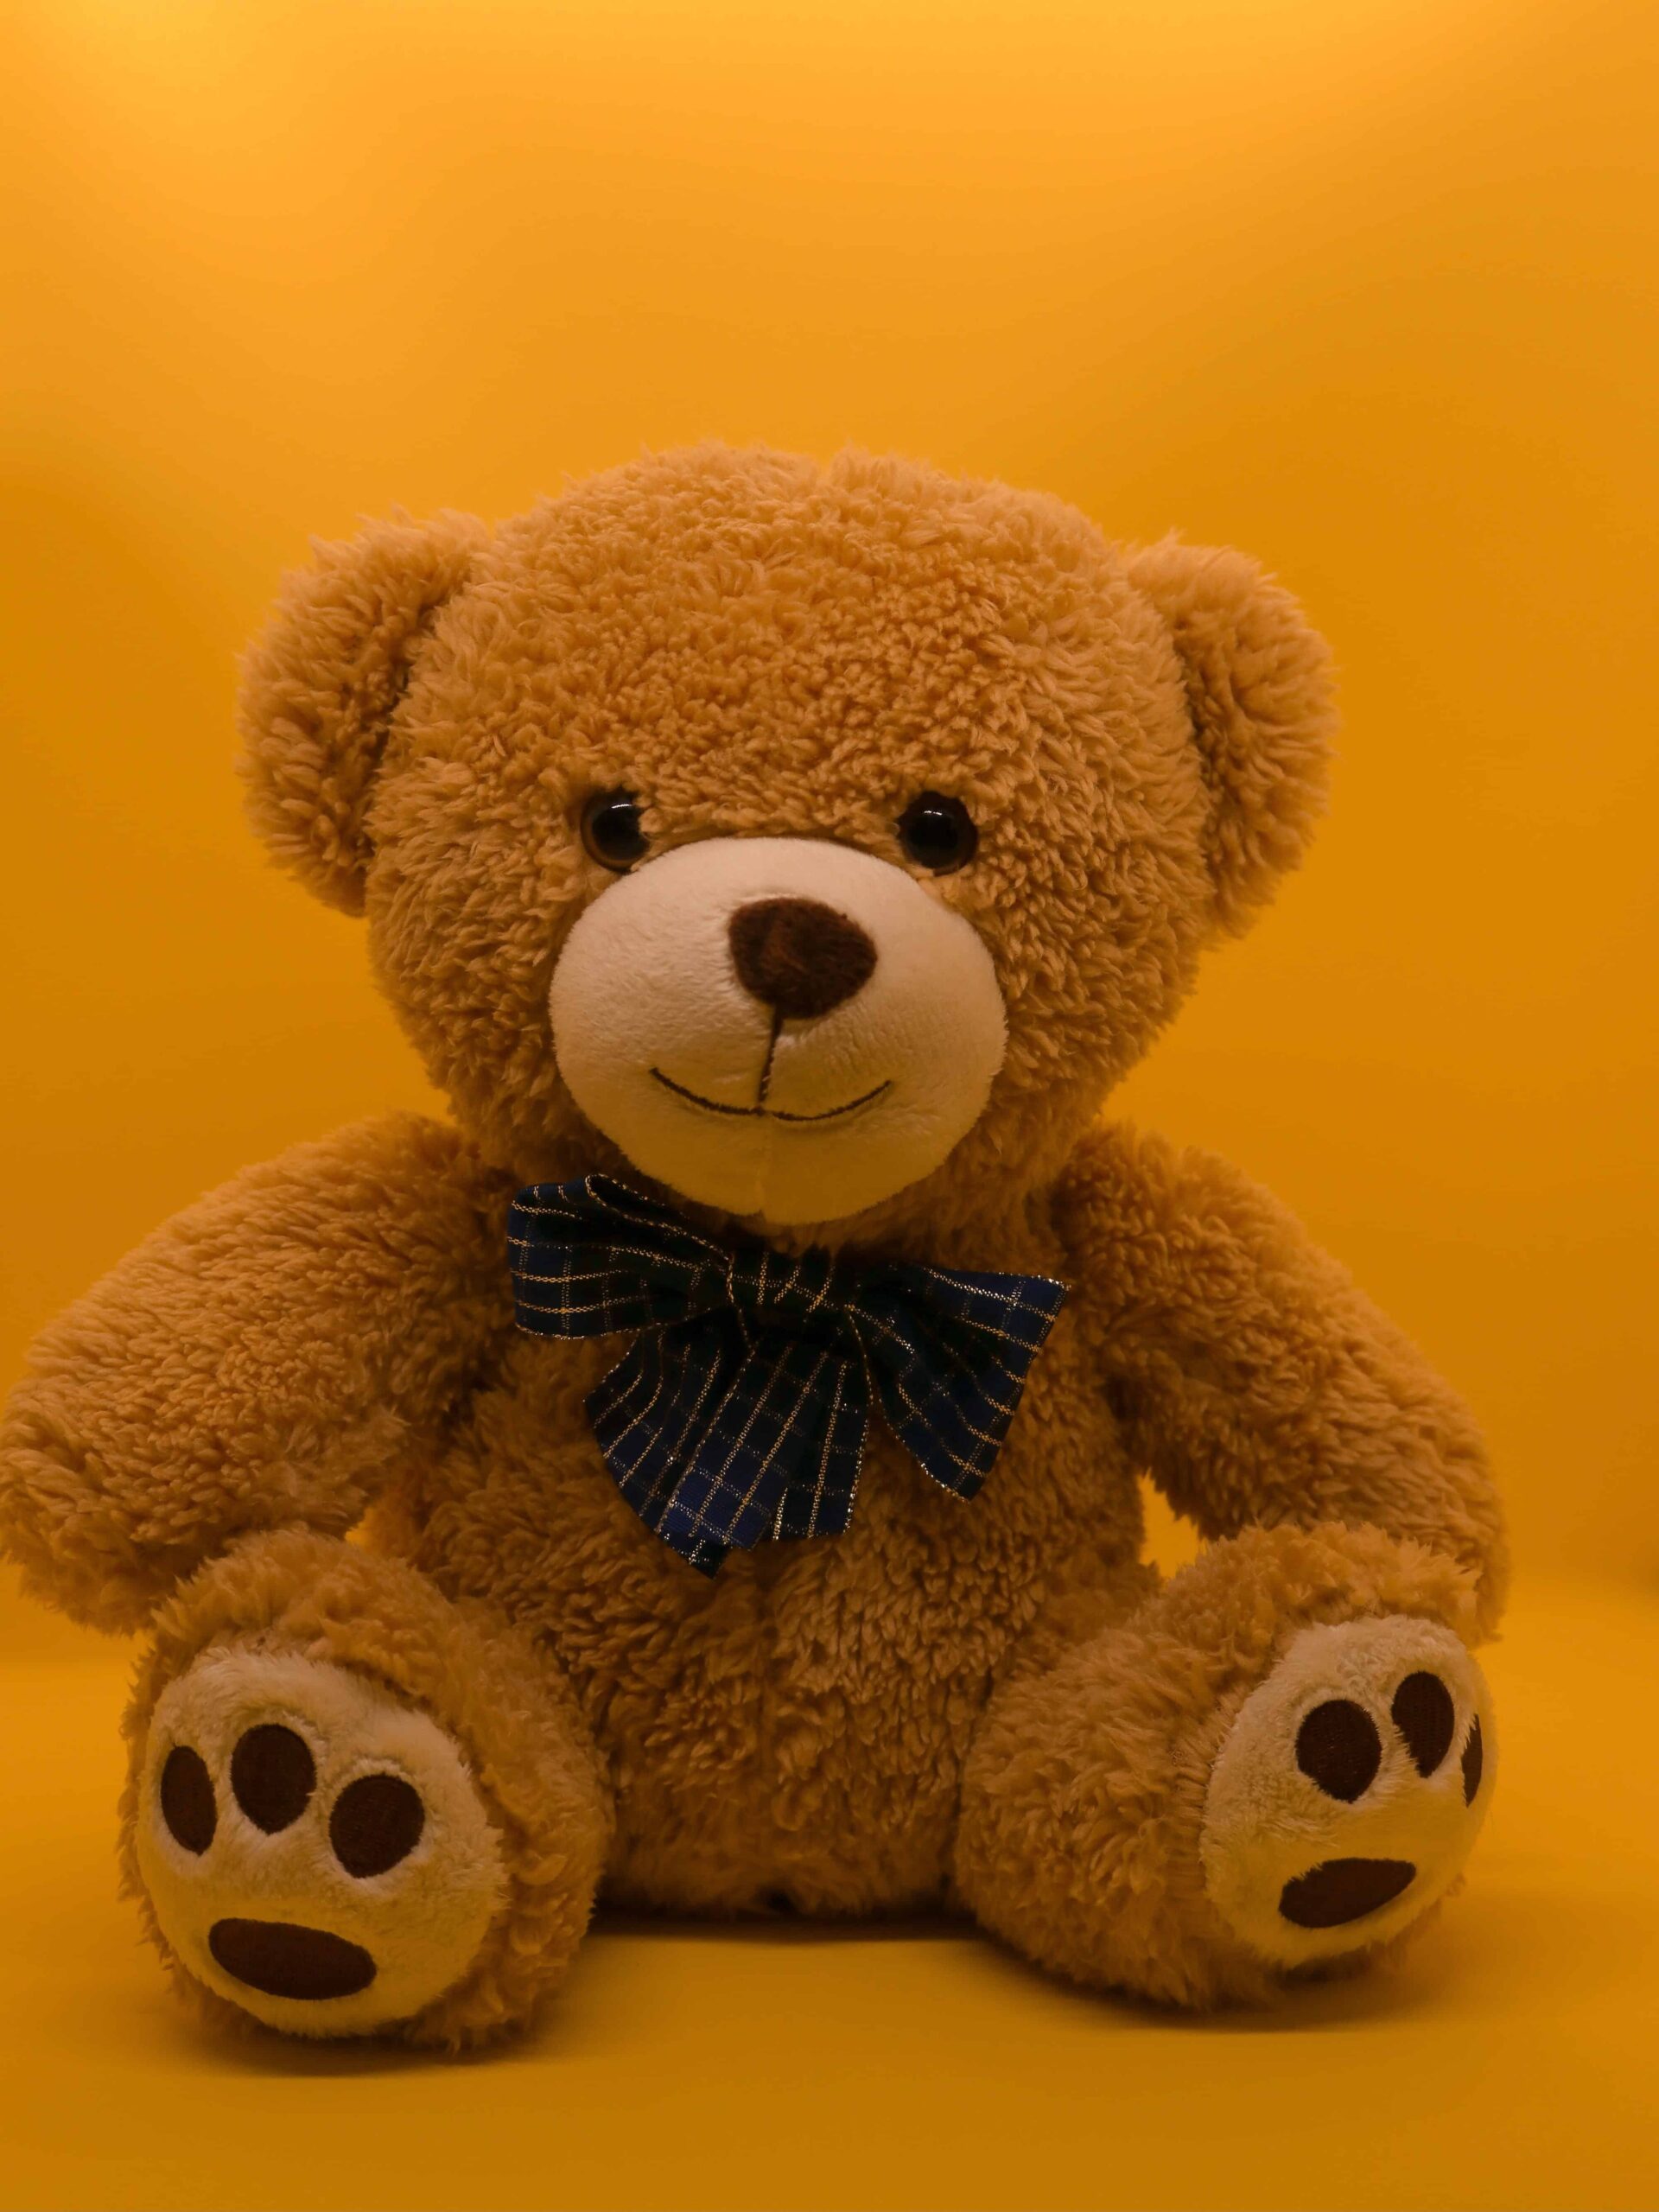 Teddy Day Images HD